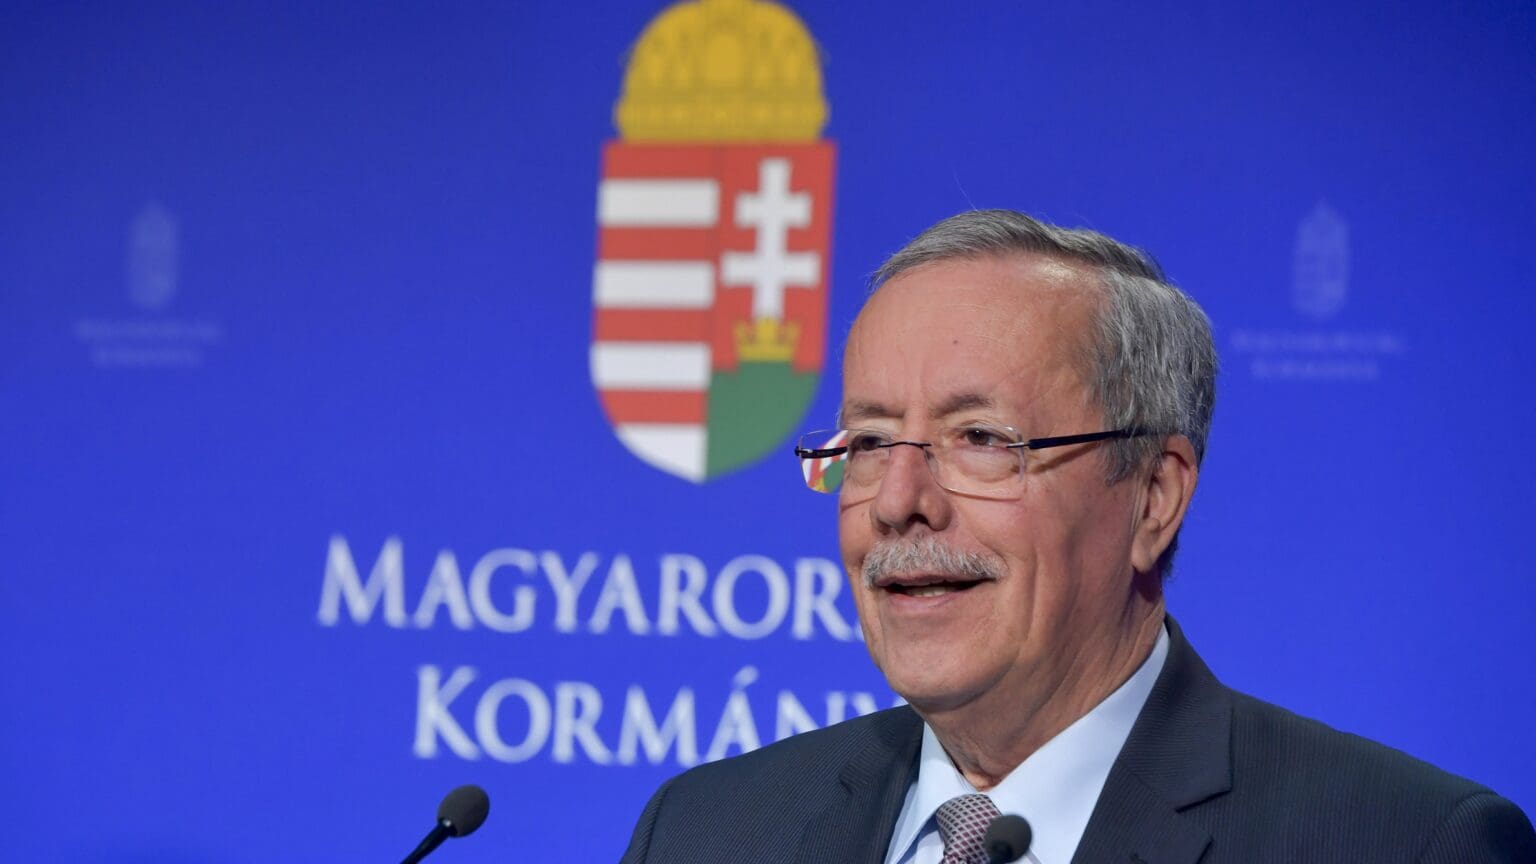 PM’s Chief Security Advisor: The Increasing Number of Illegal Immigrants Threatens Hungary